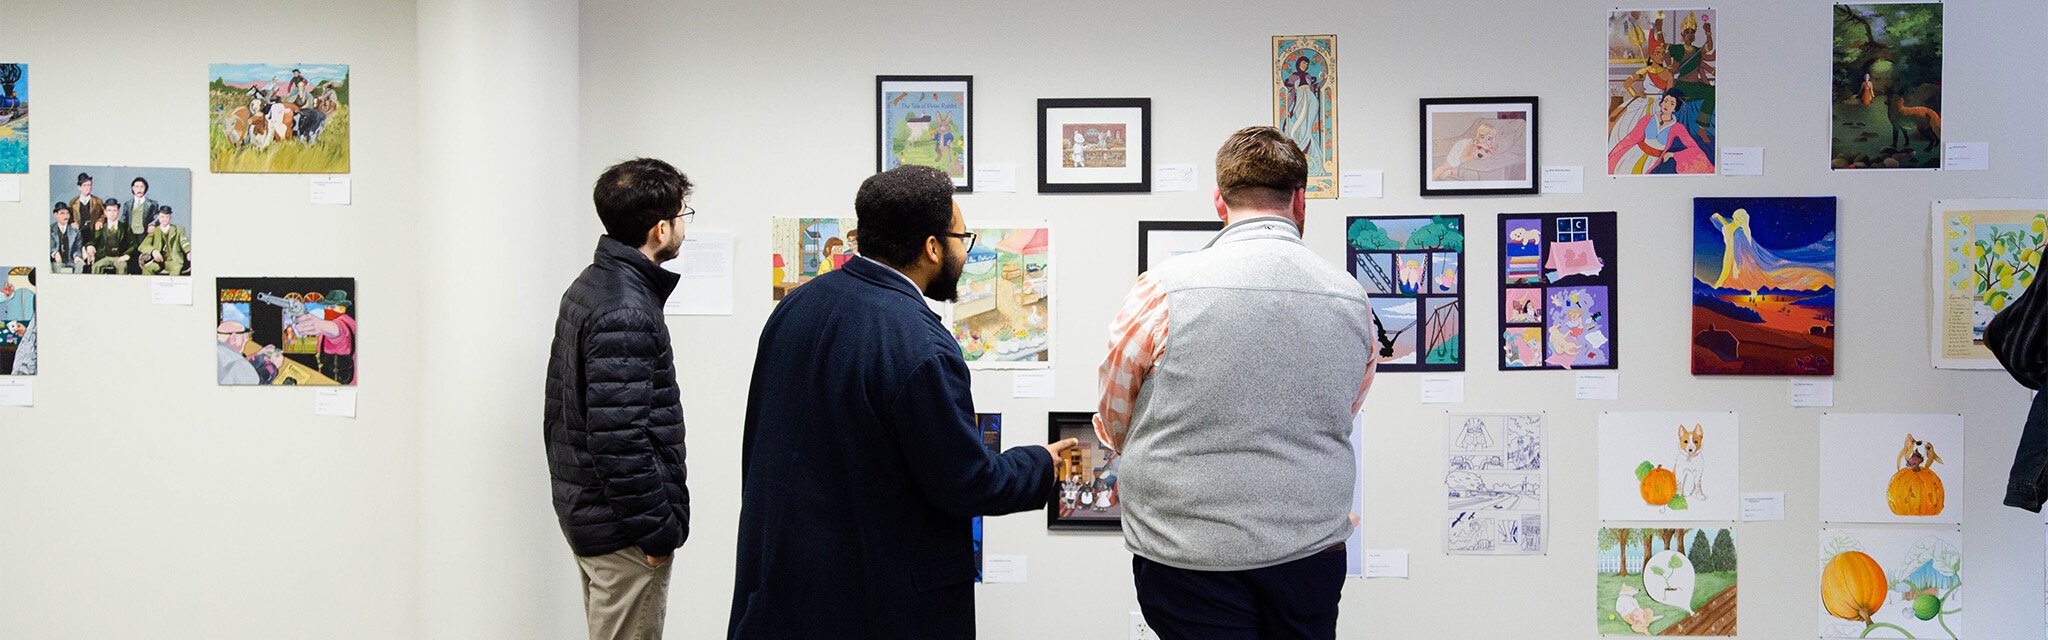 Viewers exploring the Annual Student Exhibition at Kendall College of Art and Design.